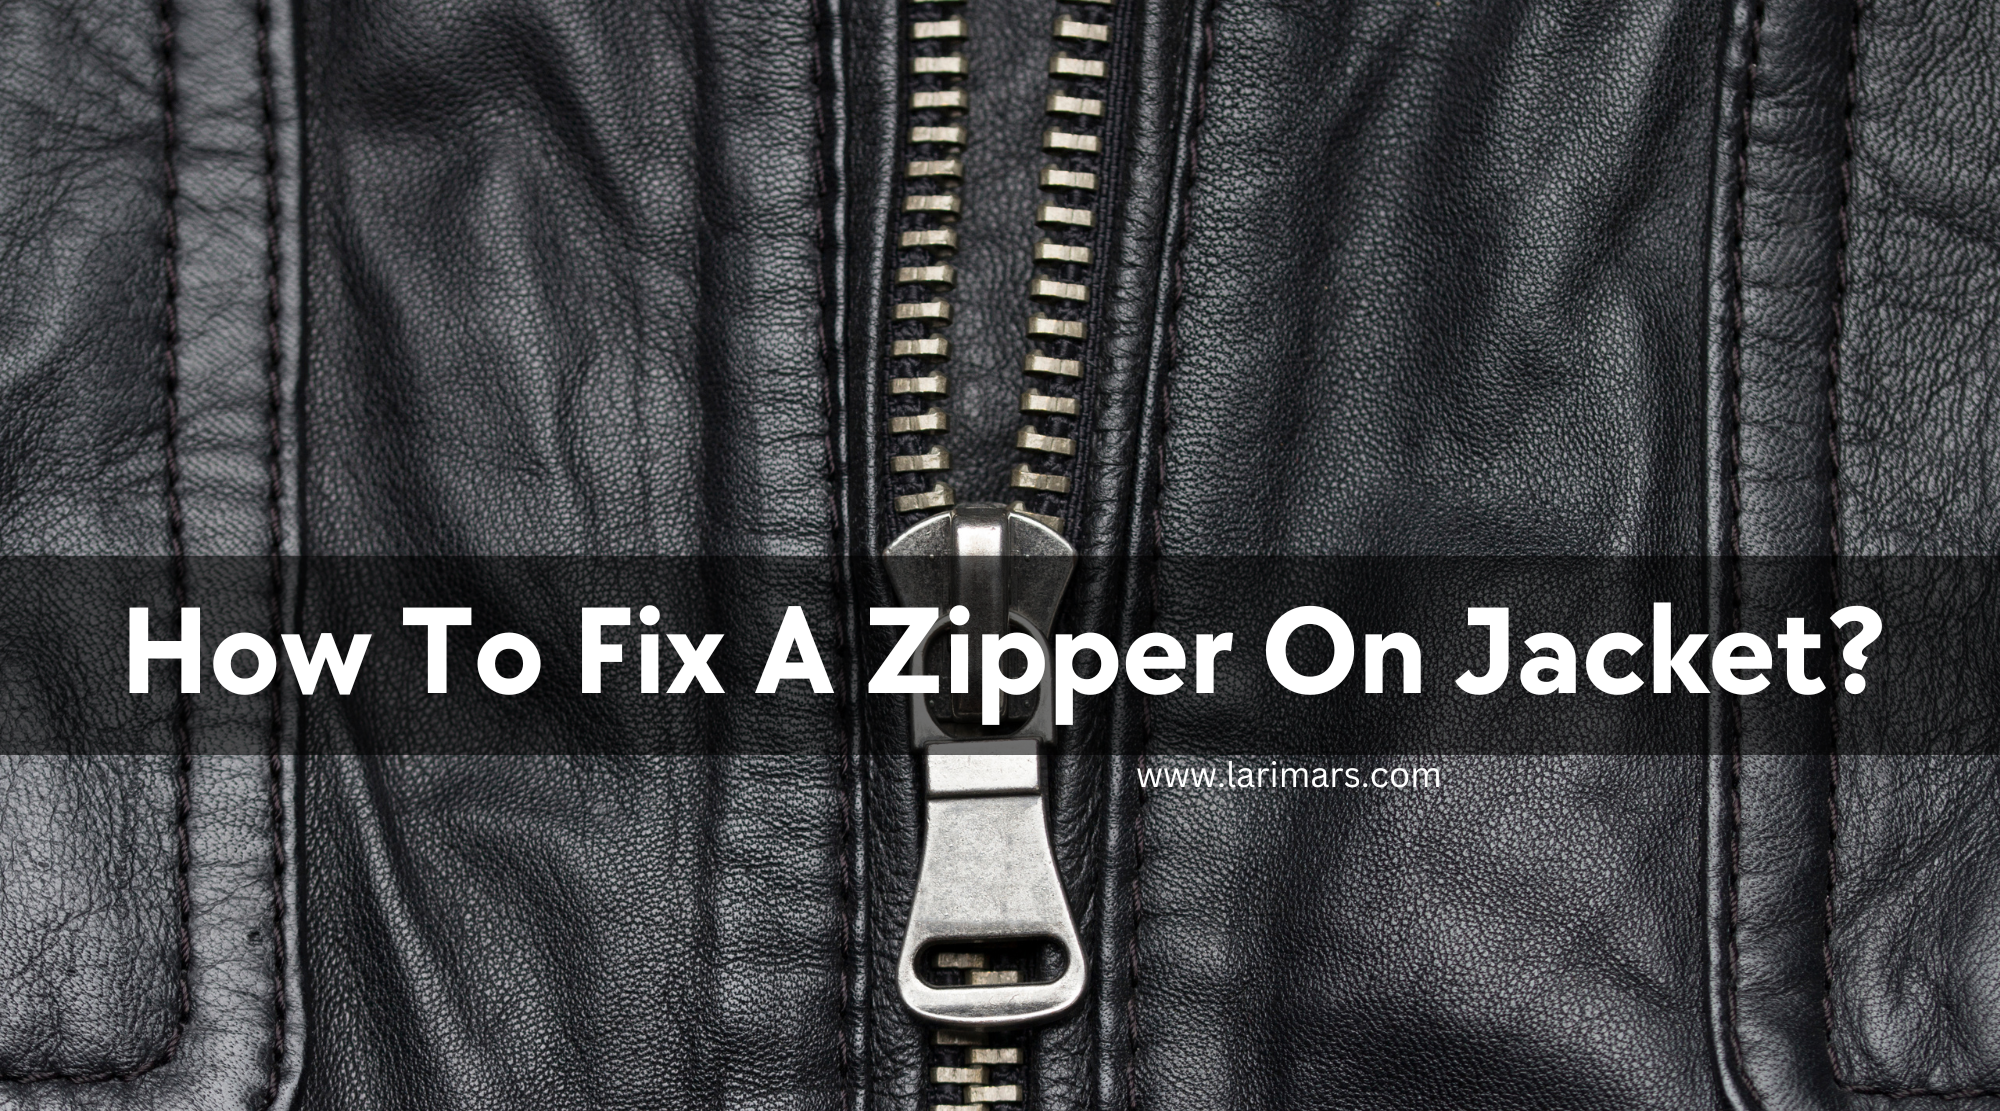 How to Replace a Zipper in a Jacket 